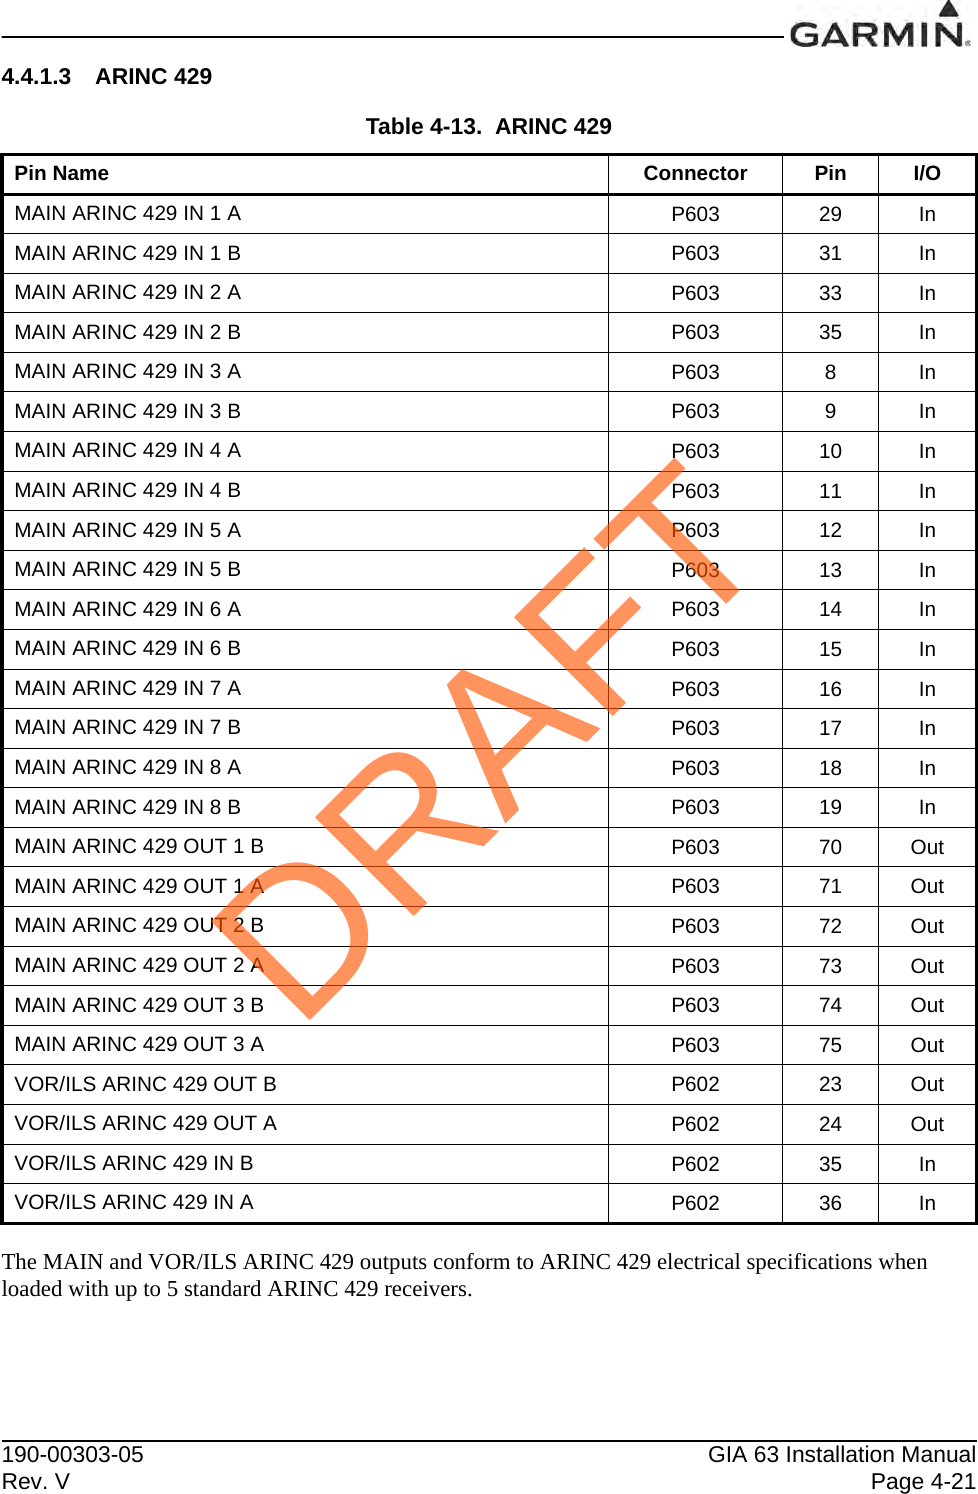 190-00303-05 GIA 63 Installation ManualRev. V Page 4-214.4.1.3 ARINC 429The MAIN and VOR/ILS ARINC 429 outputs conform to ARINC 429 electrical specifications when loaded with up to 5 standard ARINC 429 receivers.Table 4-13.  ARINC 429Pin Name Connector Pin I/OMAIN ARINC 429 IN 1 A P603 29 InMAIN ARINC 429 IN 1 B P603 31 InMAIN ARINC 429 IN 2 A P603 33 InMAIN ARINC 429 IN 2 B P603 35 InMAIN ARINC 429 IN 3 A P603 8InMAIN ARINC 429 IN 3 B P603 9InMAIN ARINC 429 IN 4 A P603 10 InMAIN ARINC 429 IN 4 B P603 11 InMAIN ARINC 429 IN 5 A P603 12 InMAIN ARINC 429 IN 5 B P603 13 InMAIN ARINC 429 IN 6 A P603 14 InMAIN ARINC 429 IN 6 B P603 15 InMAIN ARINC 429 IN 7 A P603 16 InMAIN ARINC 429 IN 7 B P603 17 InMAIN ARINC 429 IN 8 A P603 18 InMAIN ARINC 429 IN 8 B P603 19 InMAIN ARINC 429 OUT 1 B P603 70 OutMAIN ARINC 429 OUT 1 A P603 71 OutMAIN ARINC 429 OUT 2 B P603 72 OutMAIN ARINC 429 OUT 2 A P603 73 OutMAIN ARINC 429 OUT 3 B P603 74 OutMAIN ARINC 429 OUT 3 A P603 75 OutVOR/ILS ARINC 429 OUT B P602 23 OutVOR/ILS ARINC 429 OUT A P602 24 OutVOR/ILS ARINC 429 IN B P602 35 InVOR/ILS ARINC 429 IN A P602 36 InDRAFT